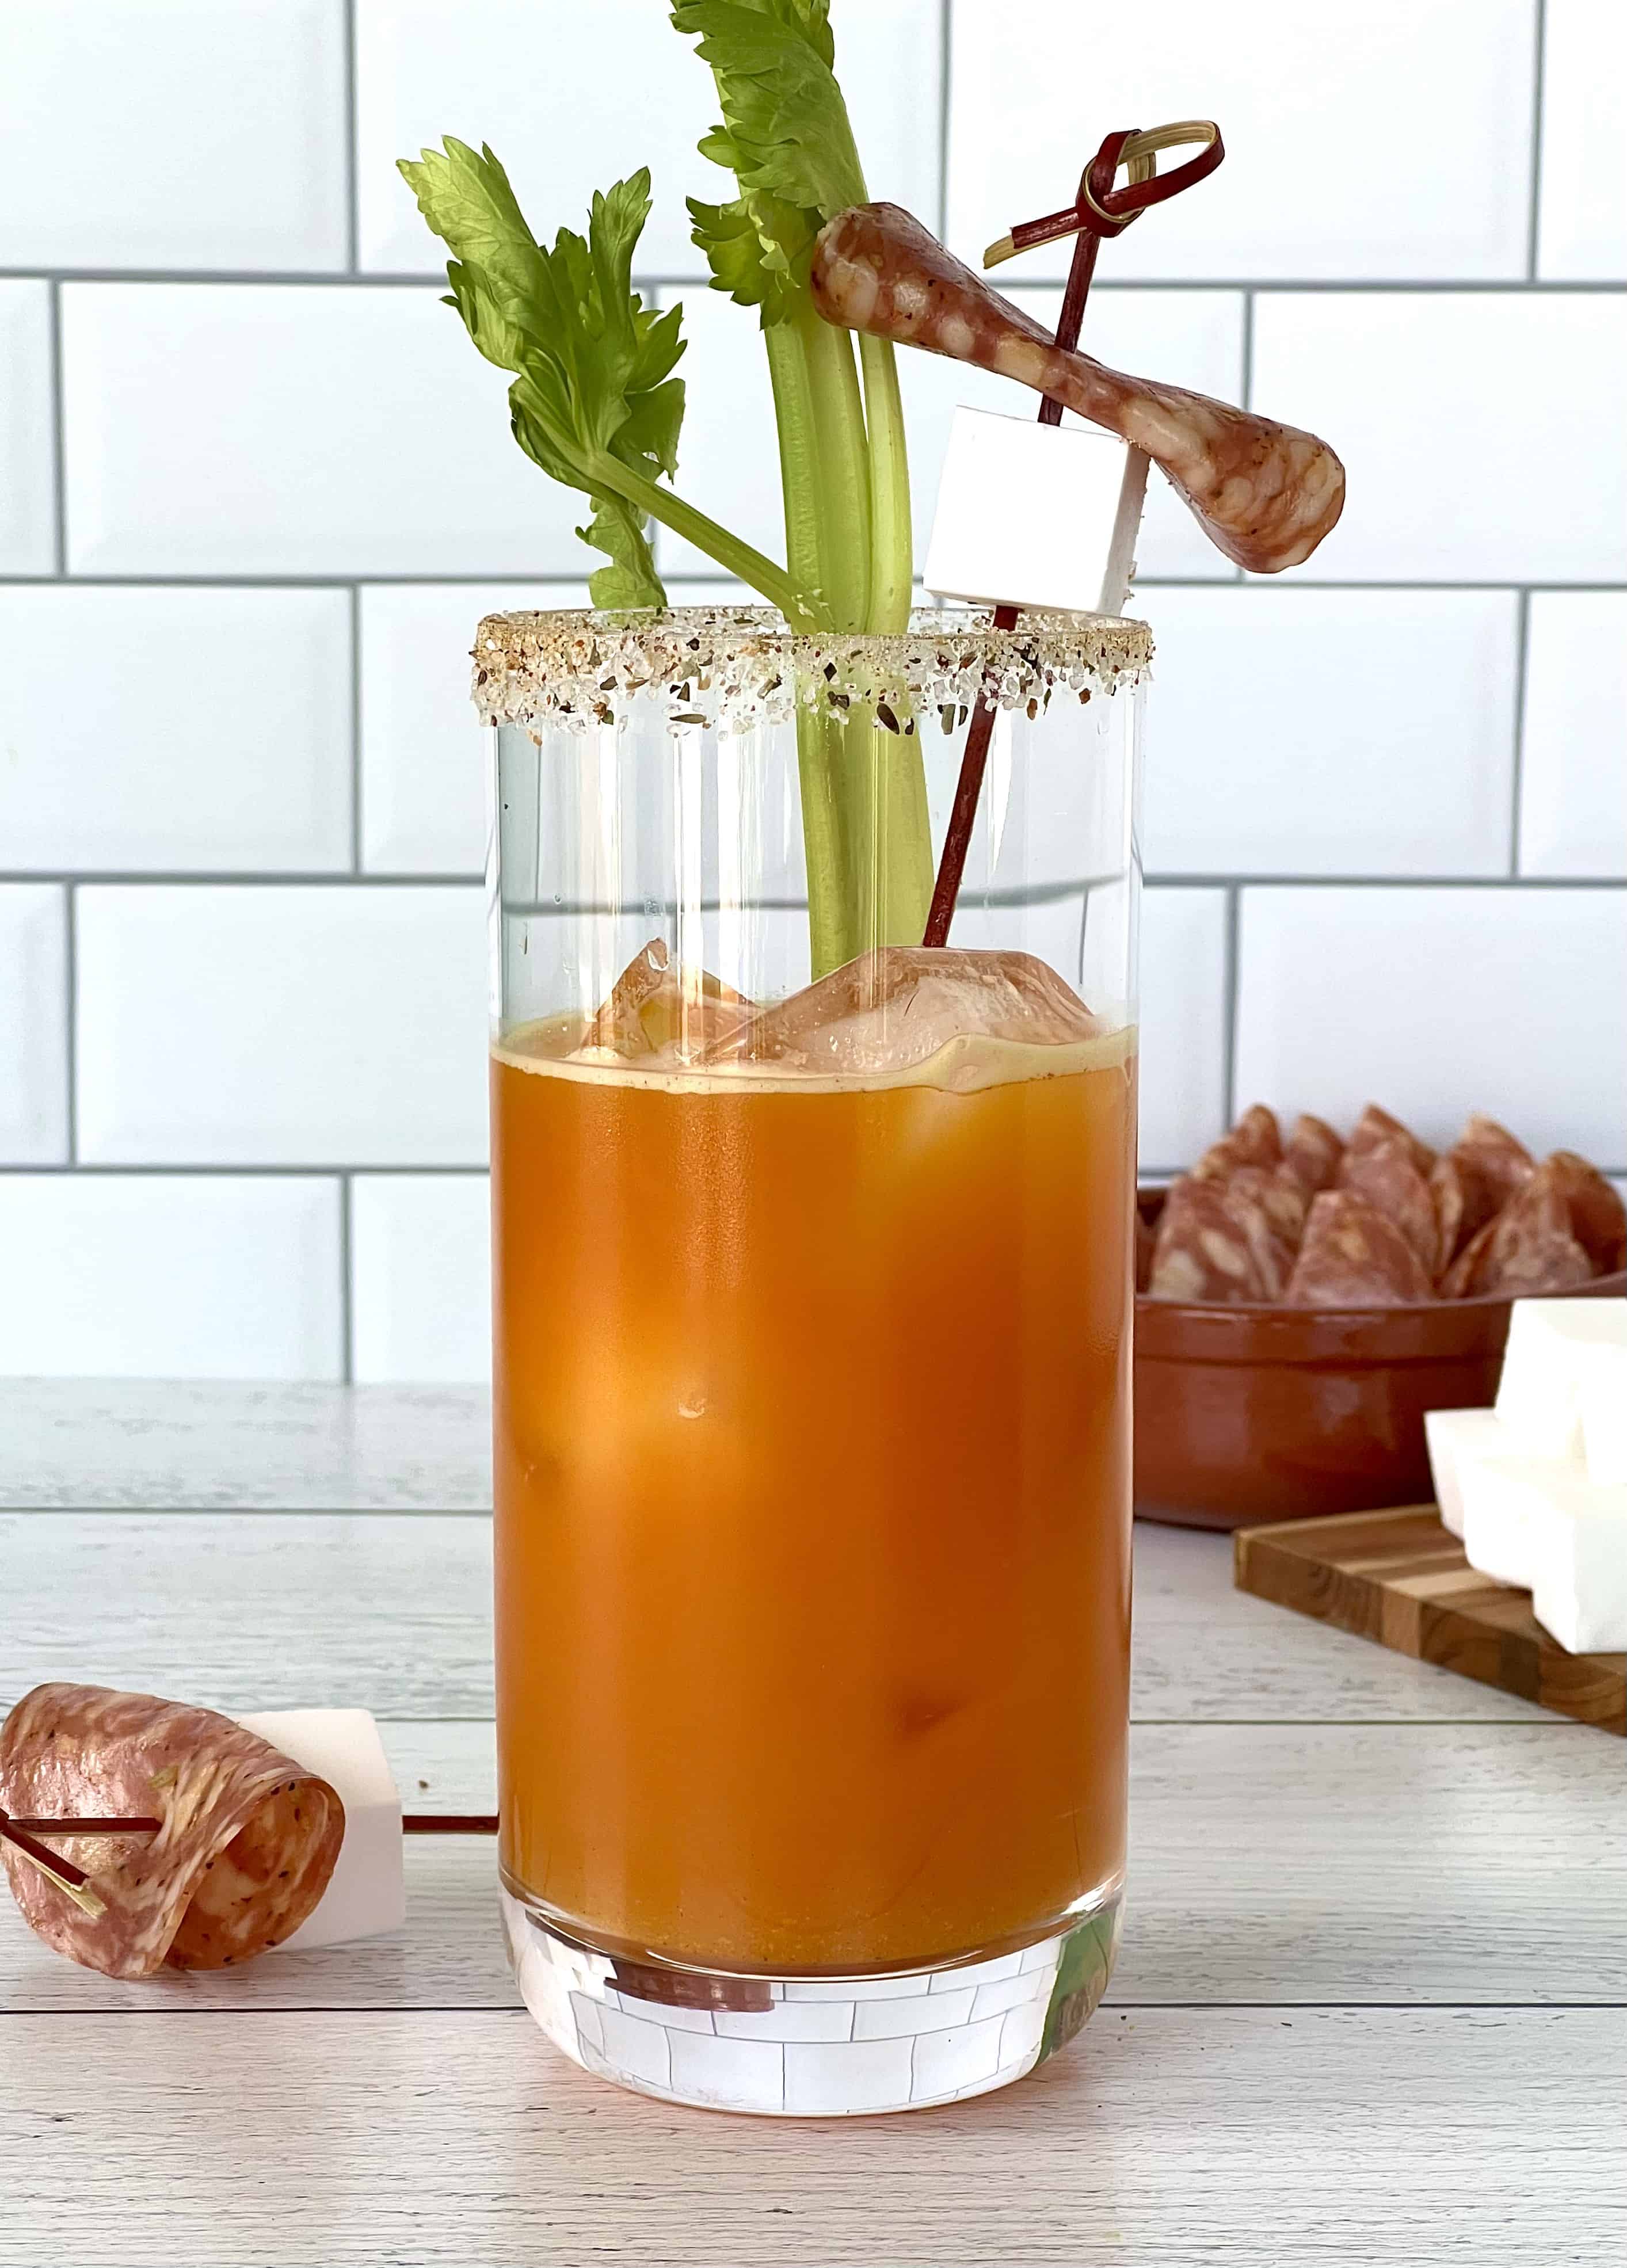 a carrot juice cocktail made with vodka and bloody mary seasonings in a highball glass